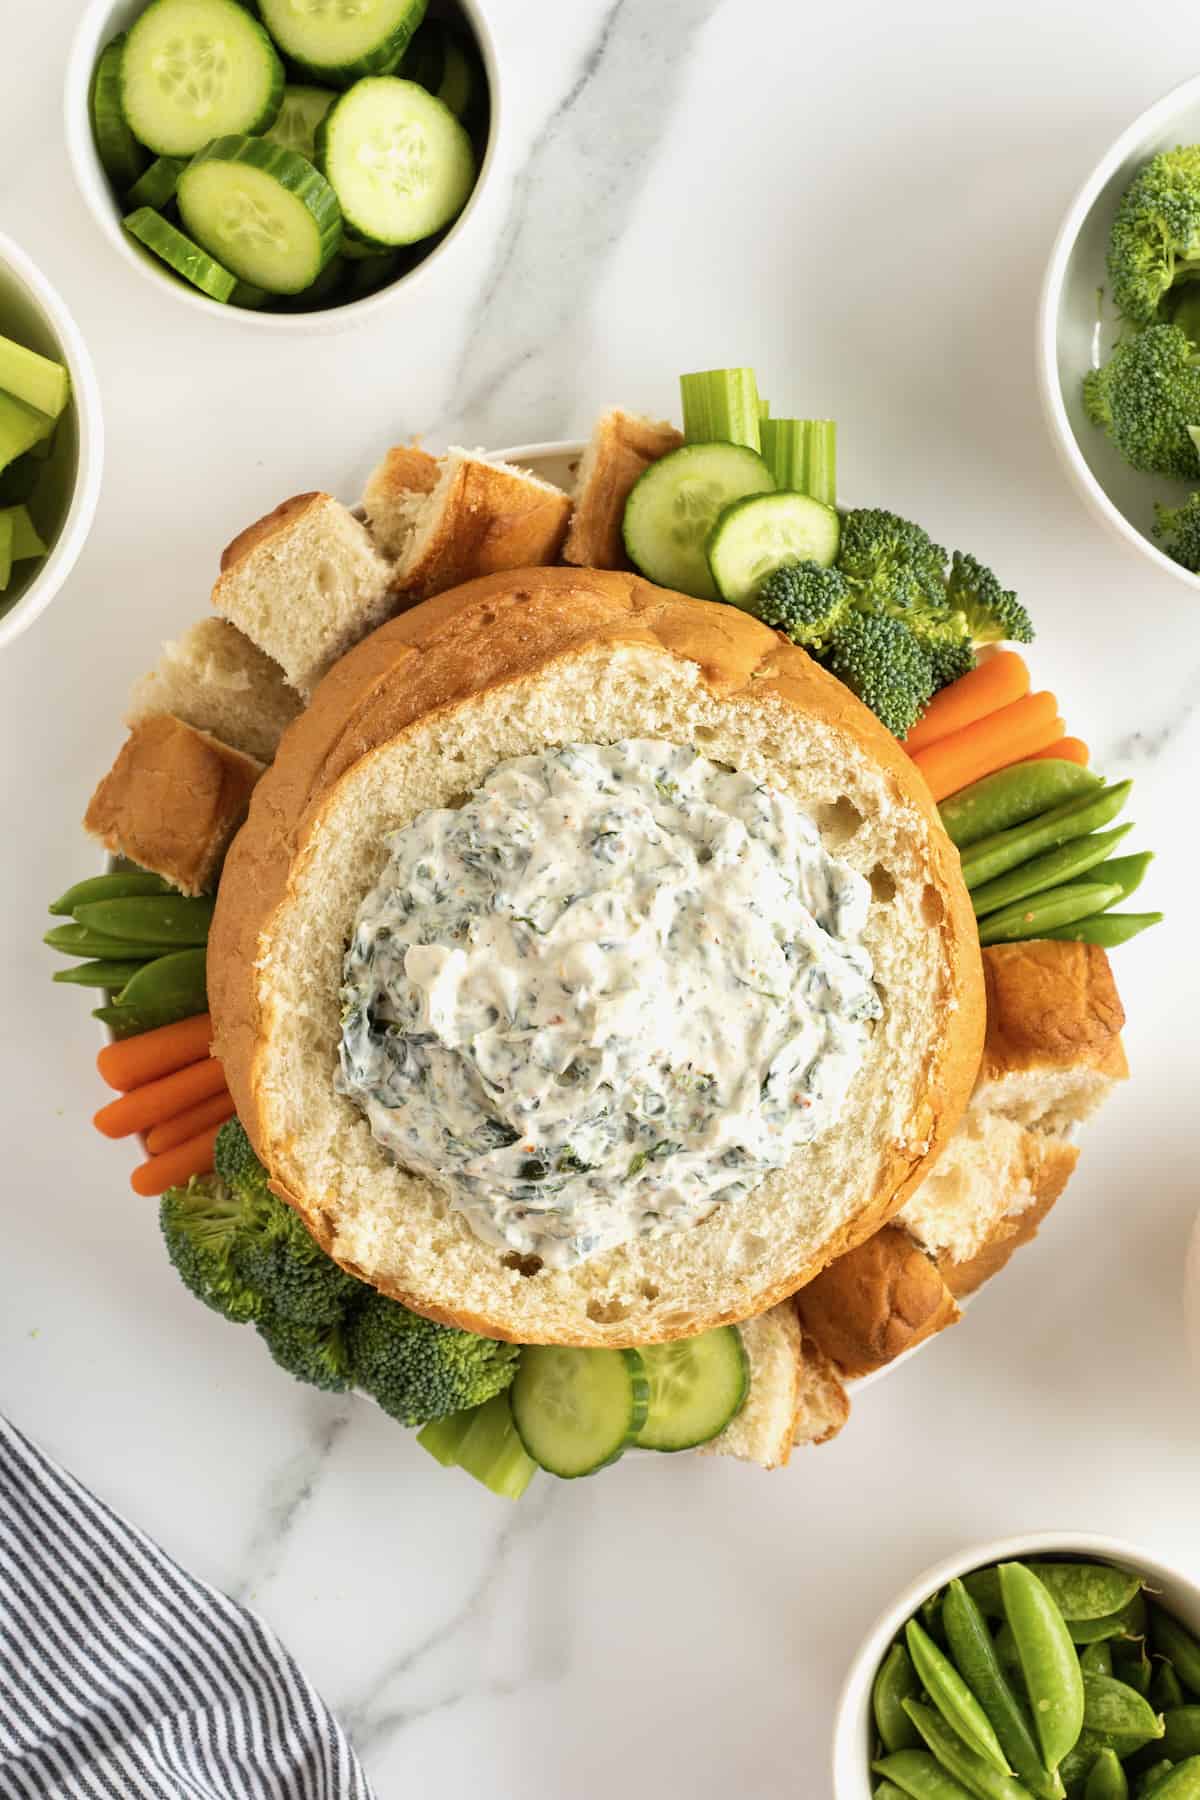 Creamy spinach dip in bread bowl surrounded by fresh vegetables and bread chunks.